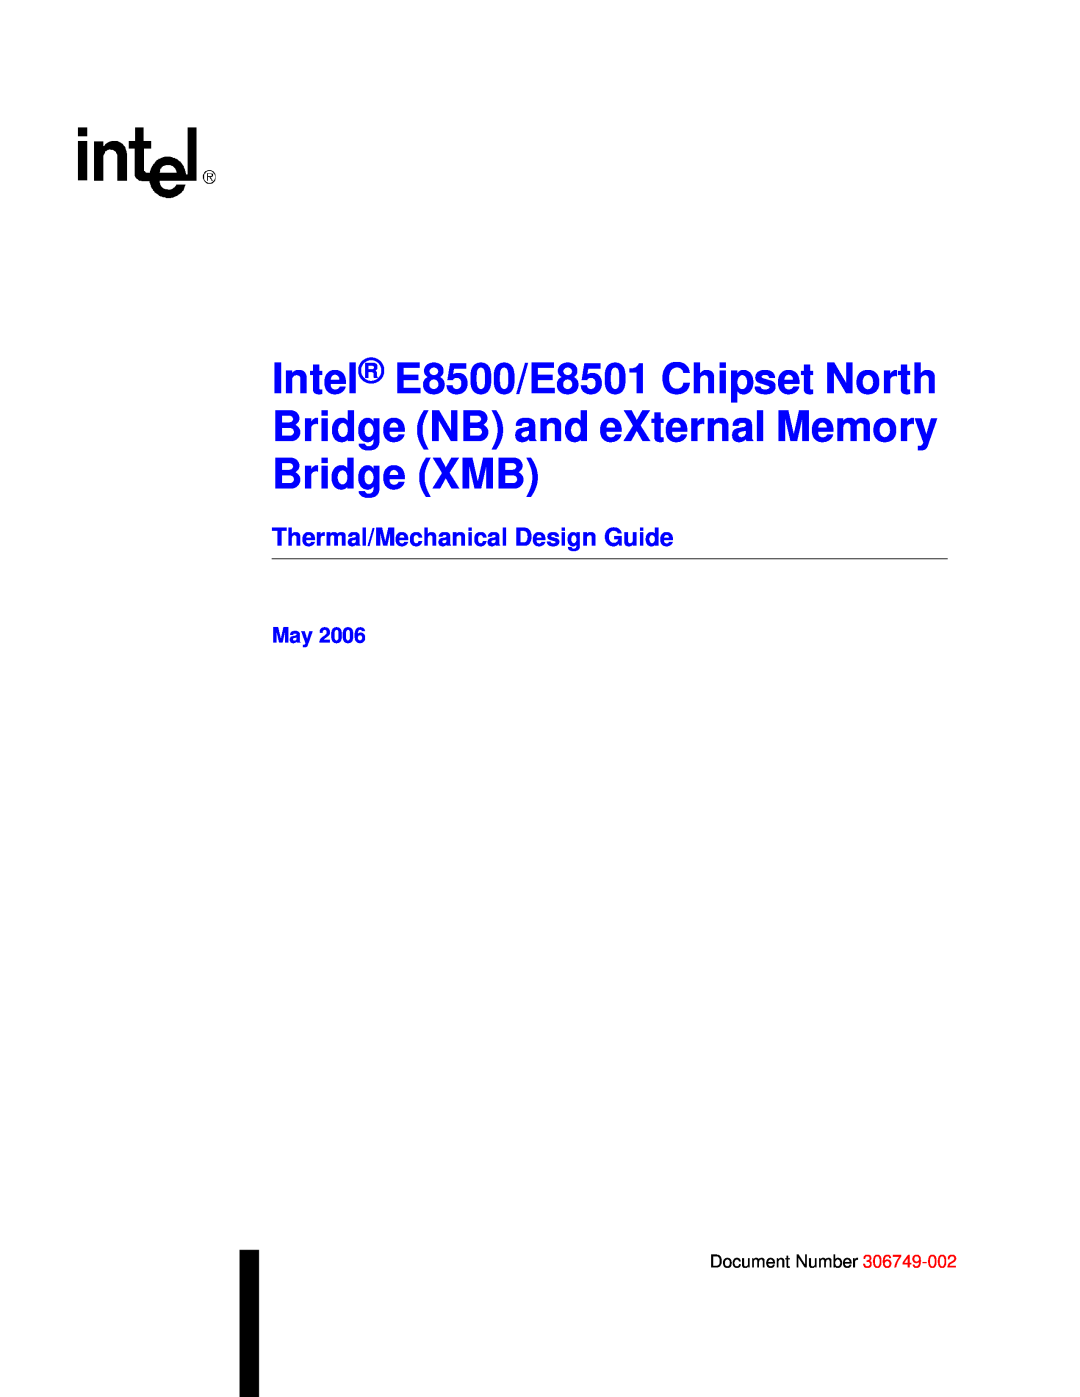 Intel manual Thermal/Mechanical Design Guide, Document Number, Intel E8500/E8501 Chipset North 